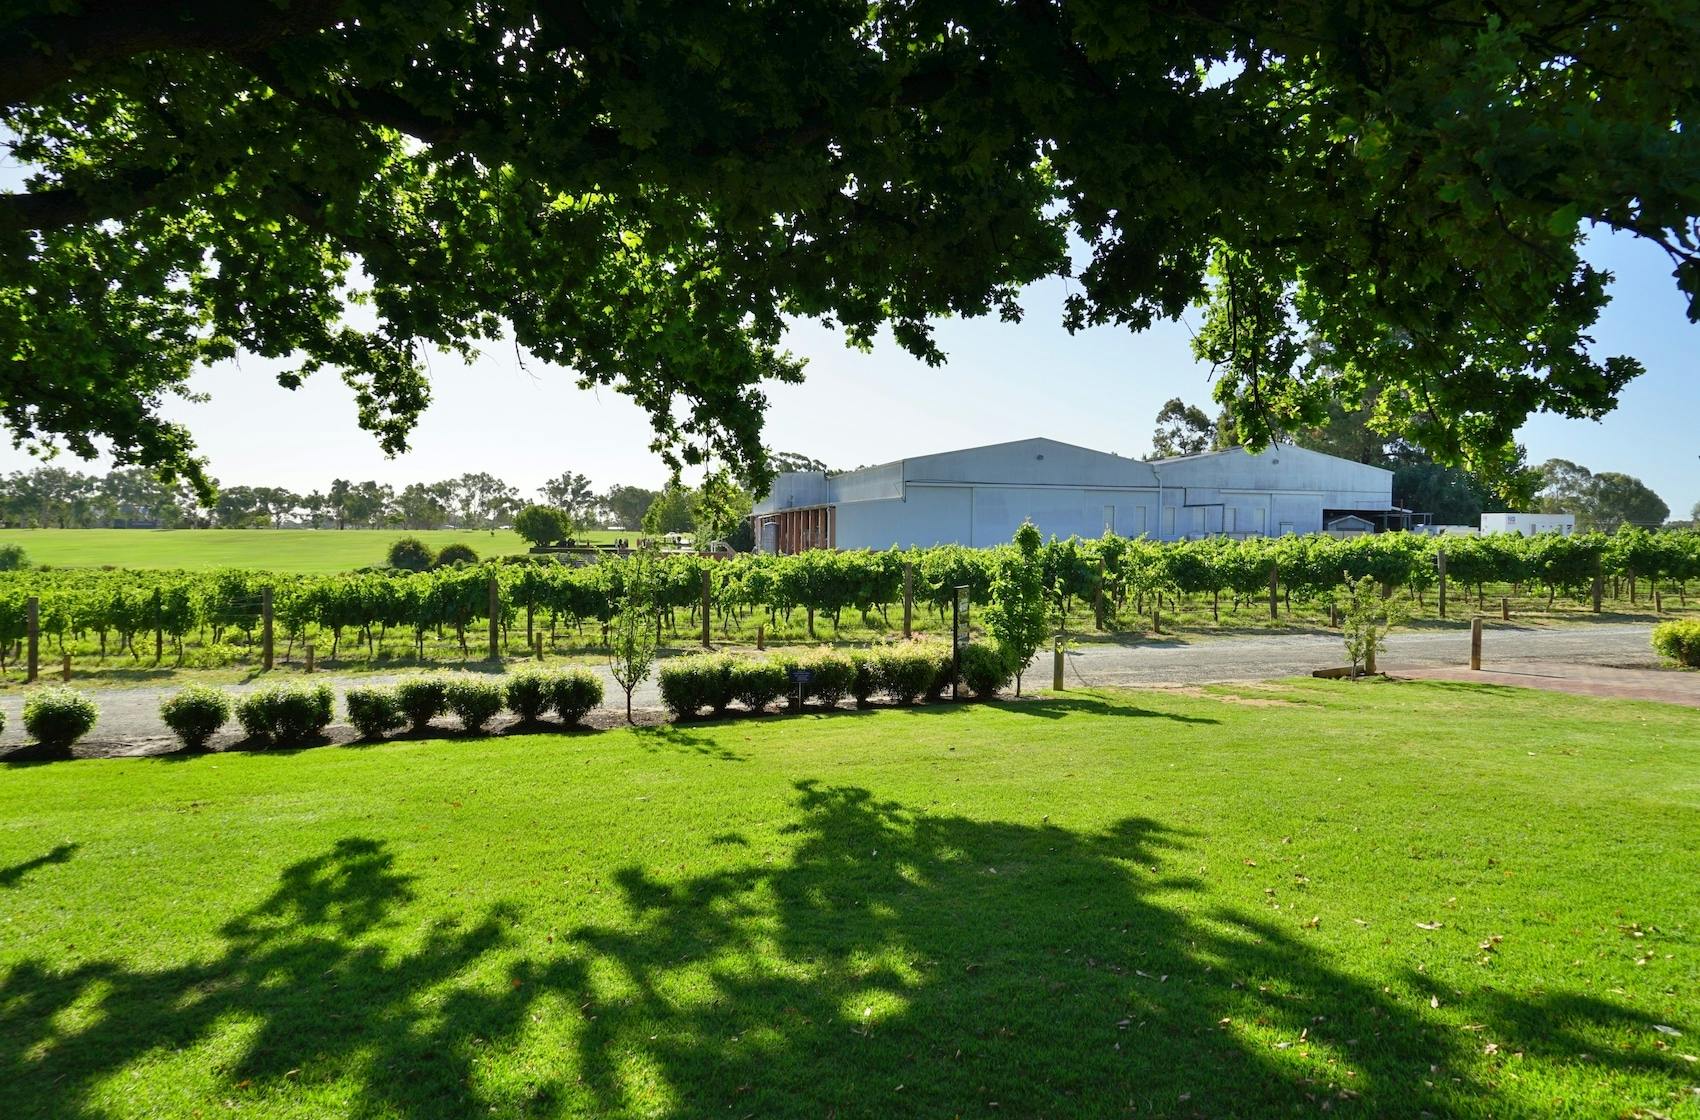 The Best Things to do in the Swan Valley